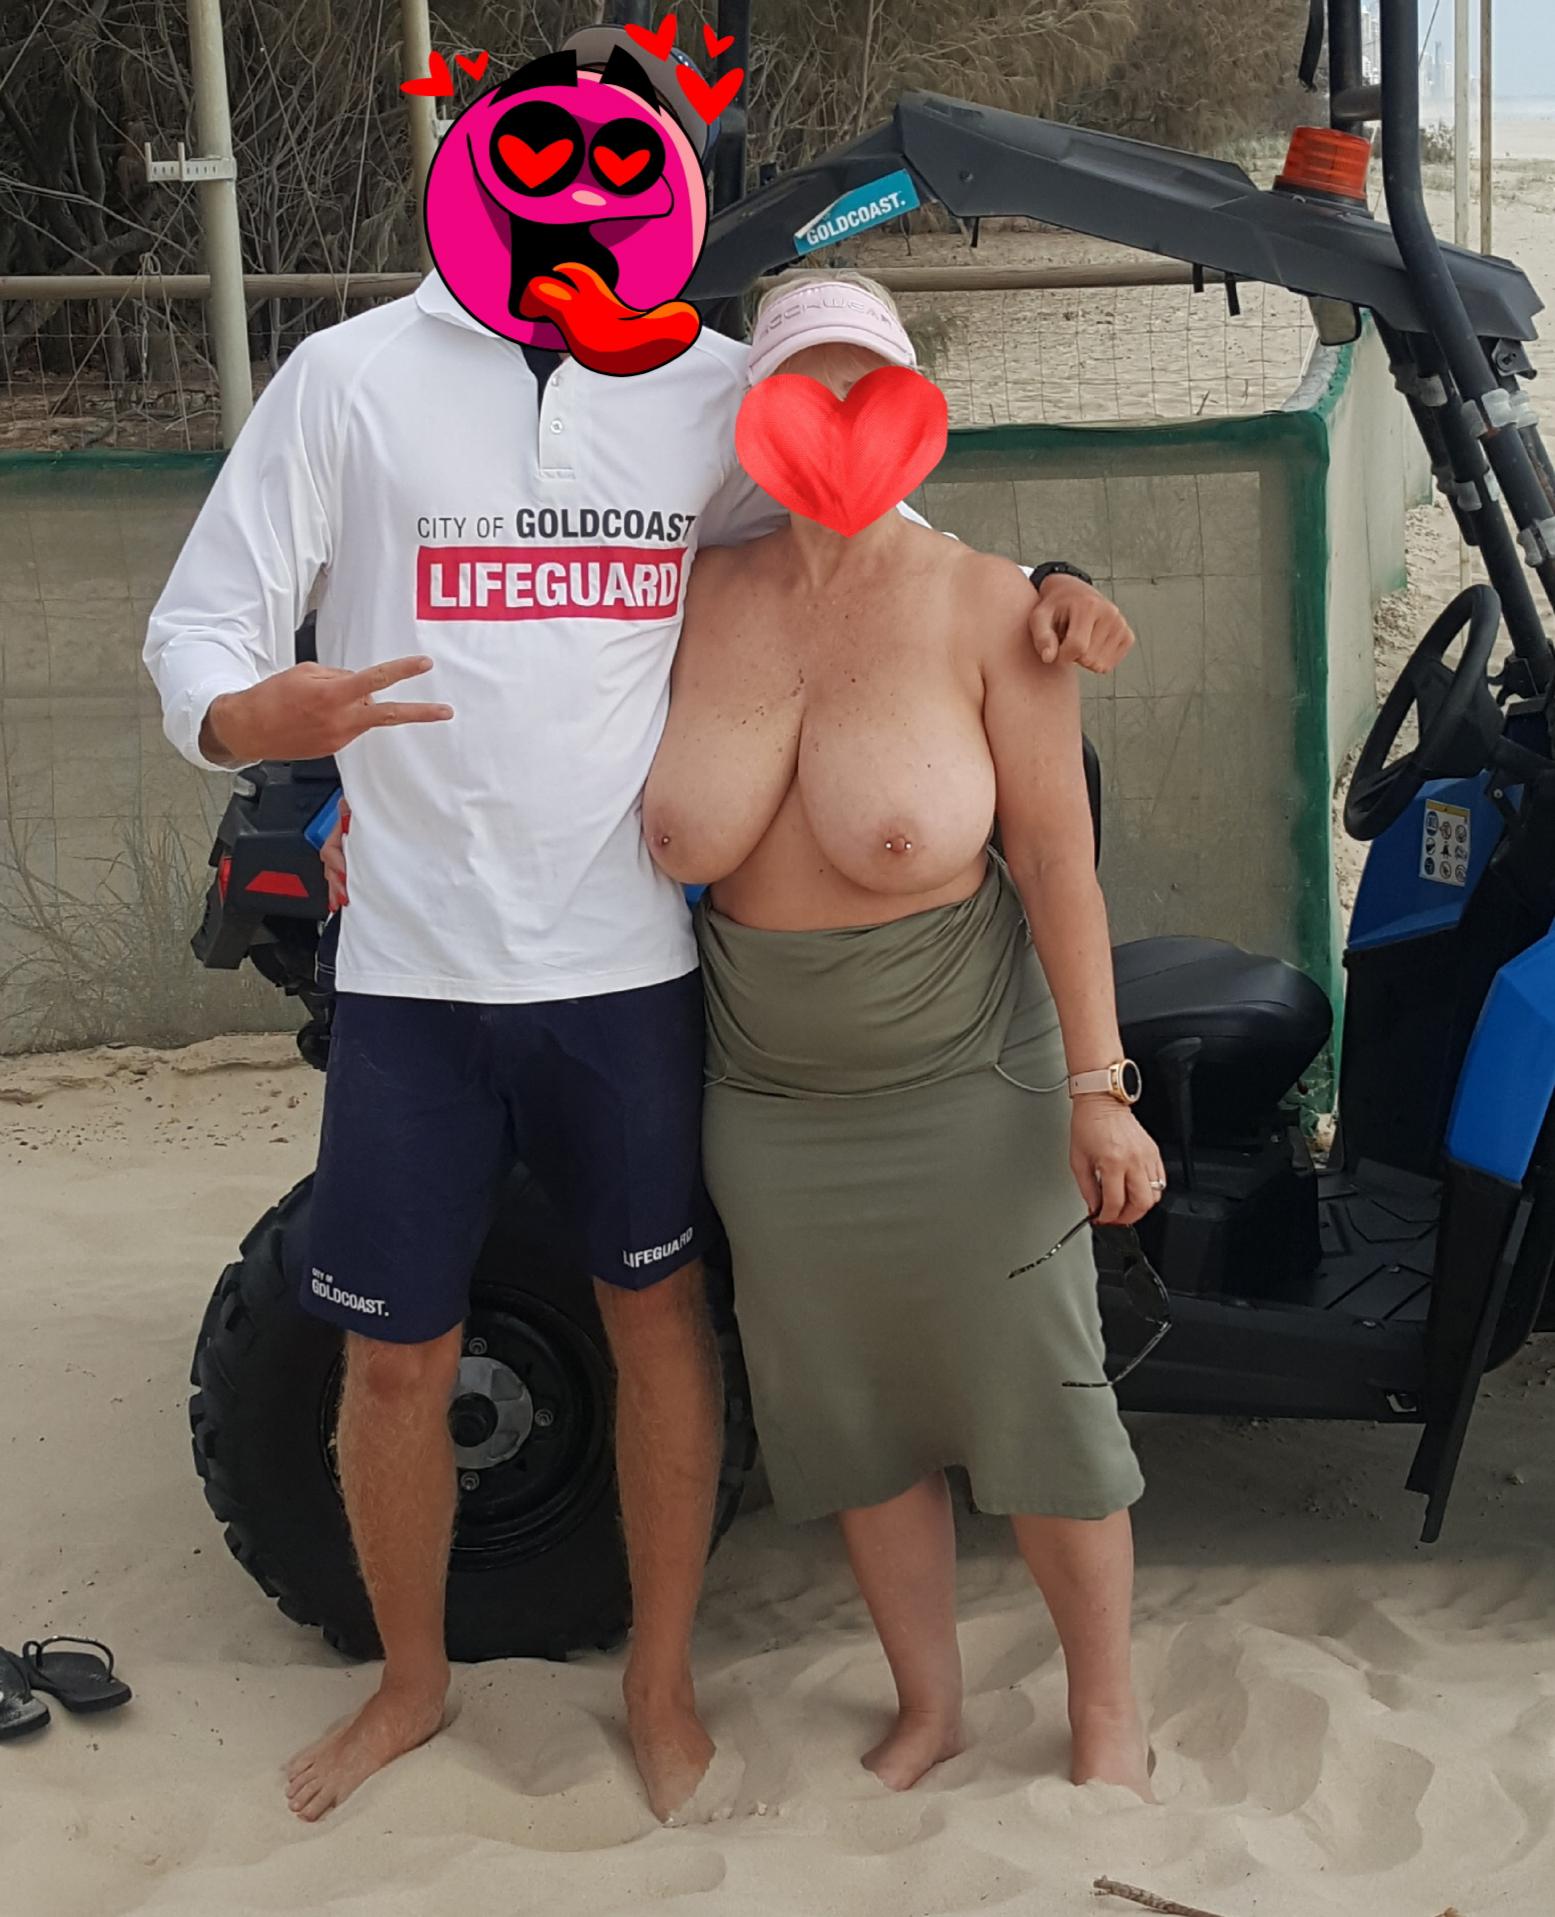 Life guard on the Gold Coast recognised me from Reddit and asked if he could have